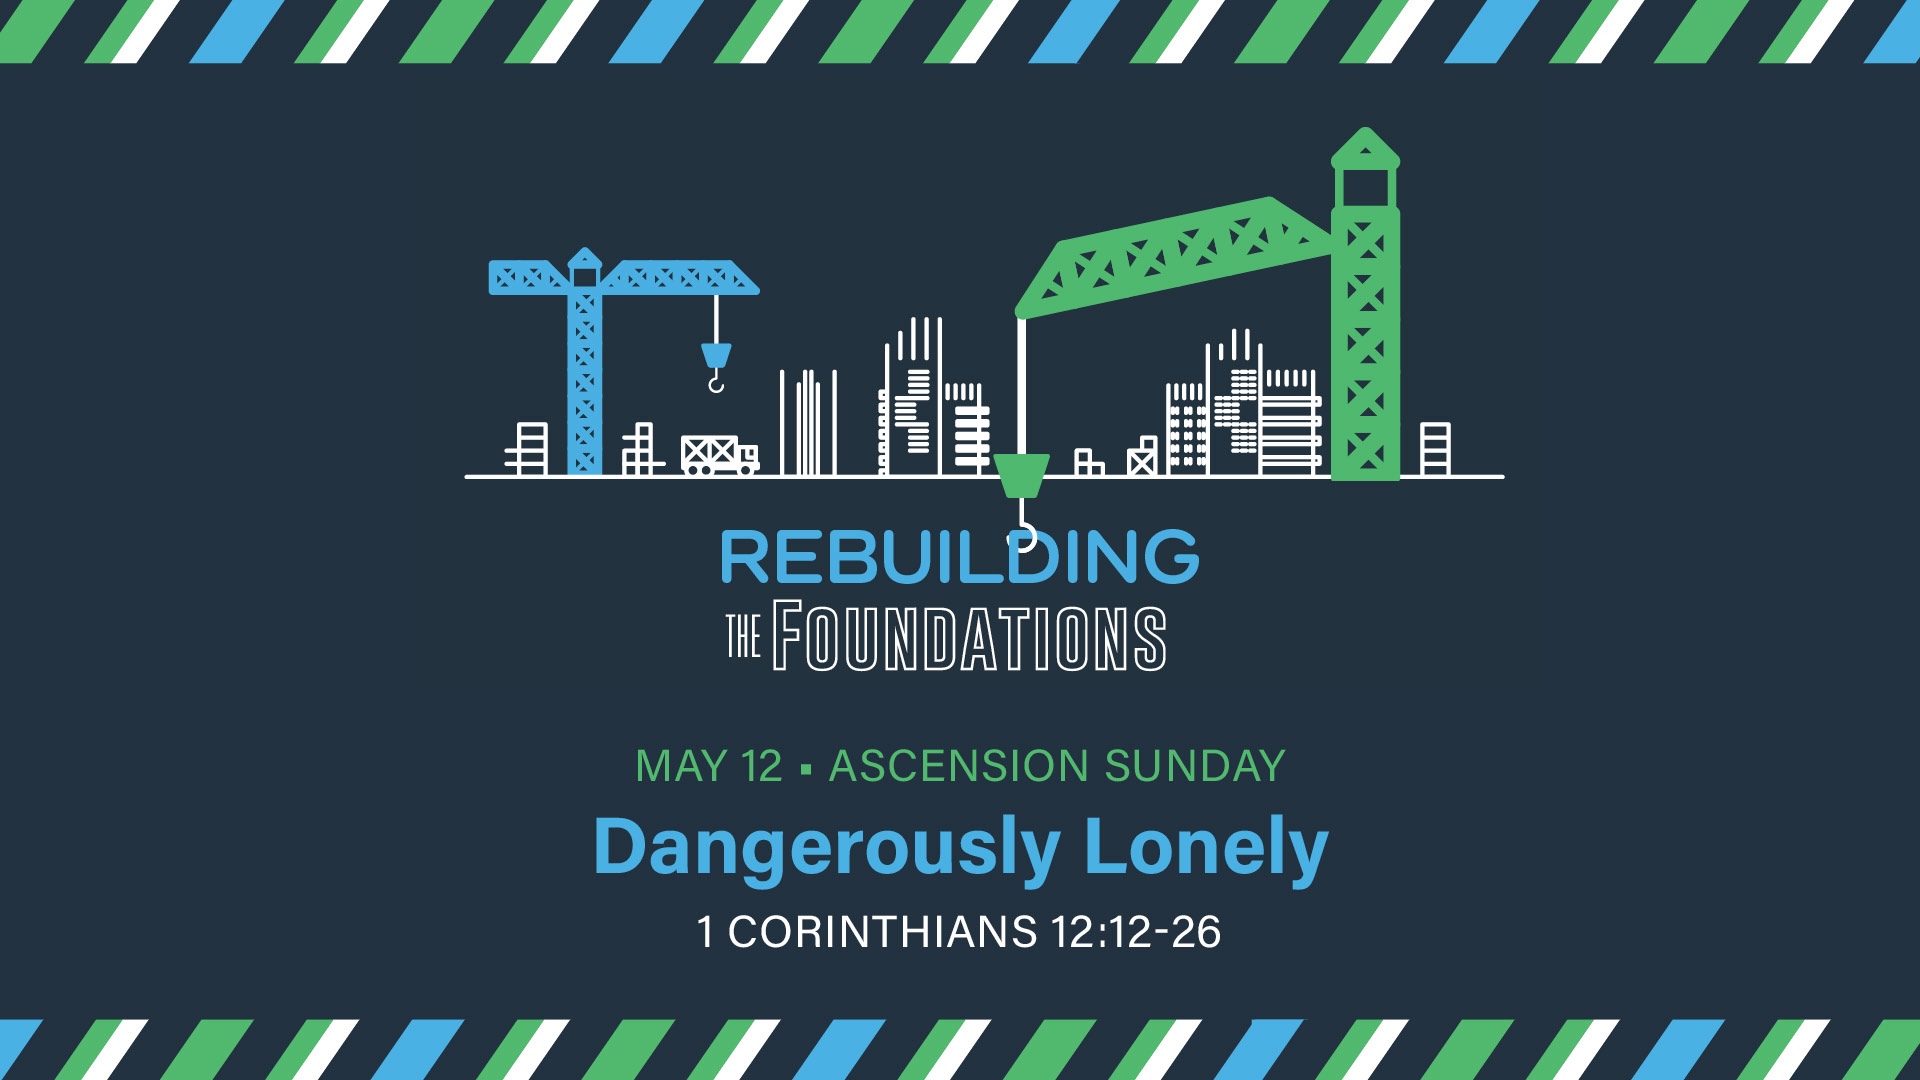 Rebuilding the Foundations: Dangerously Lonely